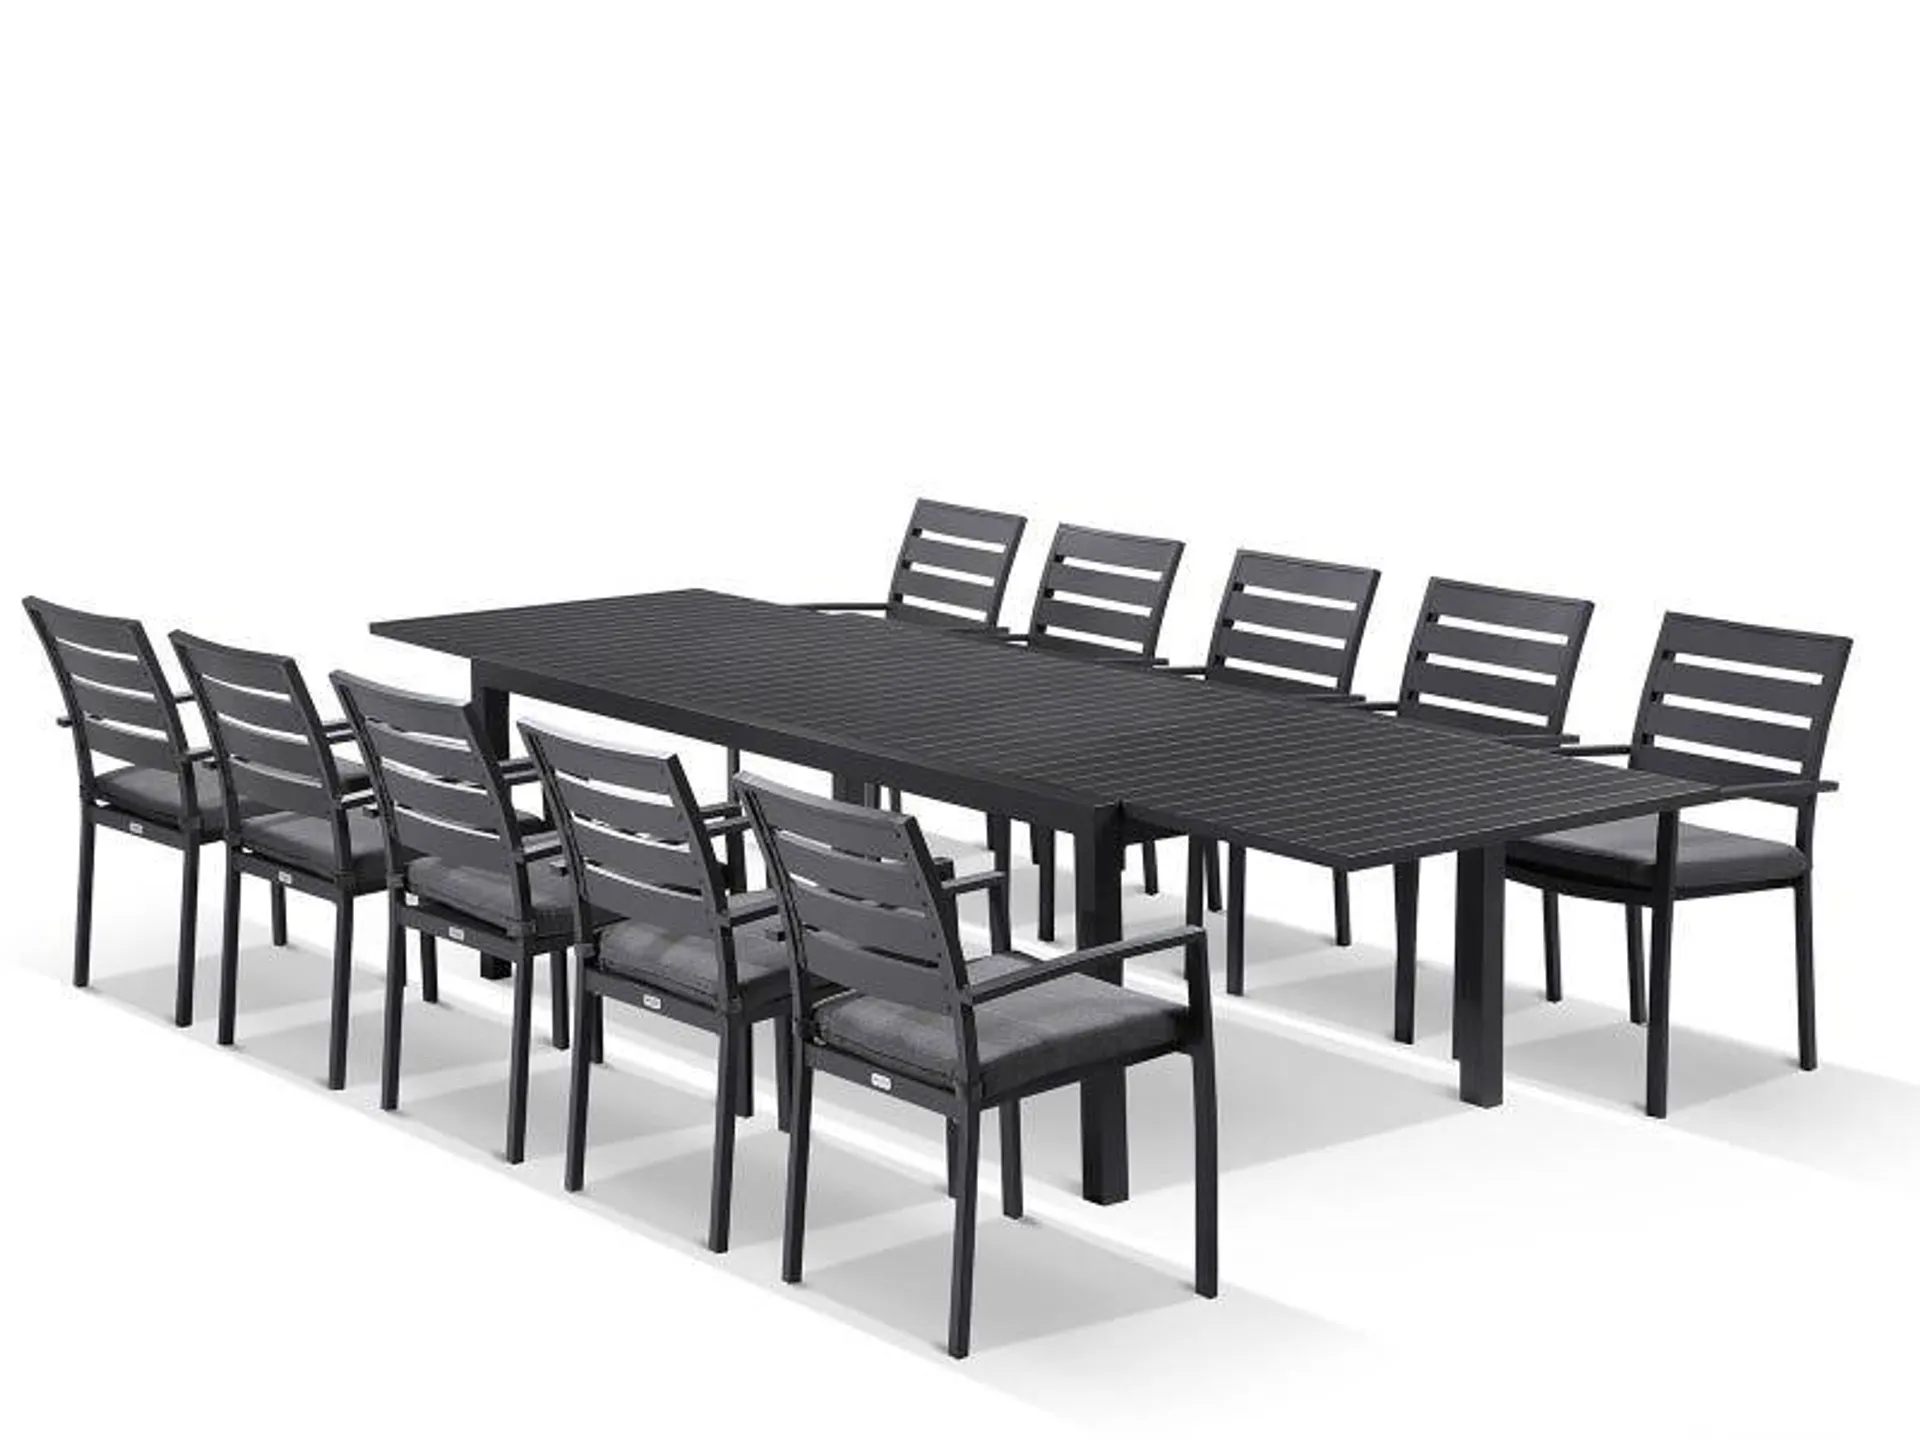 Bronte Extension table with Twain Chairs 11pc Outdoor Dining Setting